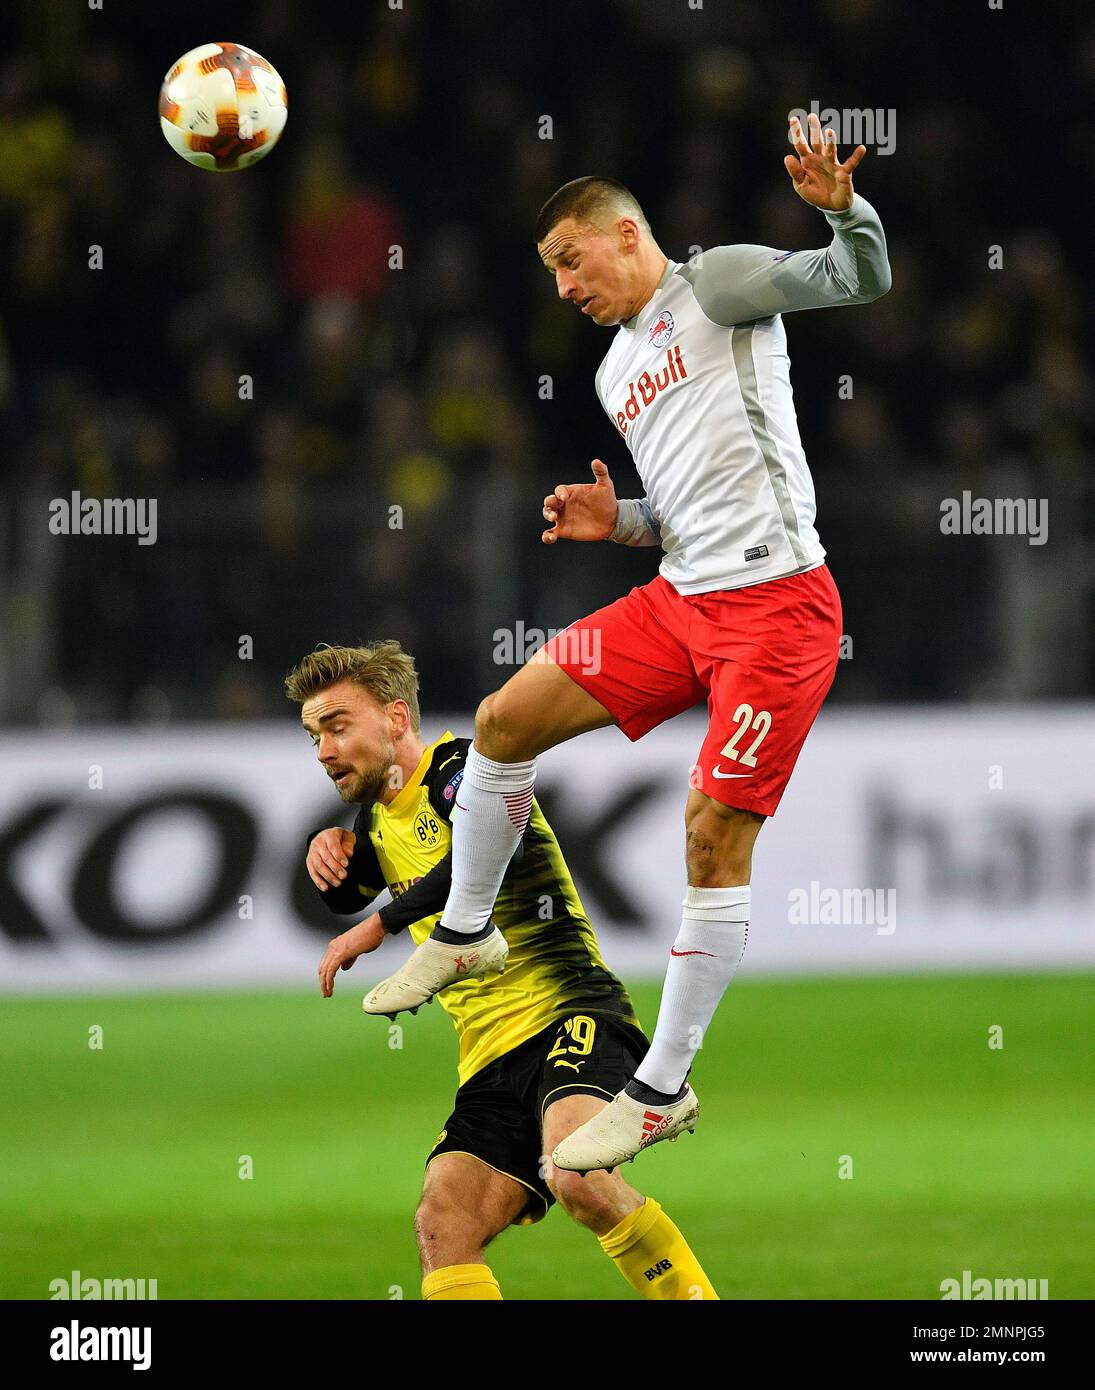 Salzburg's Stefan Lainer, up, and Dortmund's Marcel Schmelzer challenge for  the ball during the Europa League soccer match between Borussia Dortmund  and FC Salzburg in Dortmund, Germany, Thursday, March 8, 2018. (AP